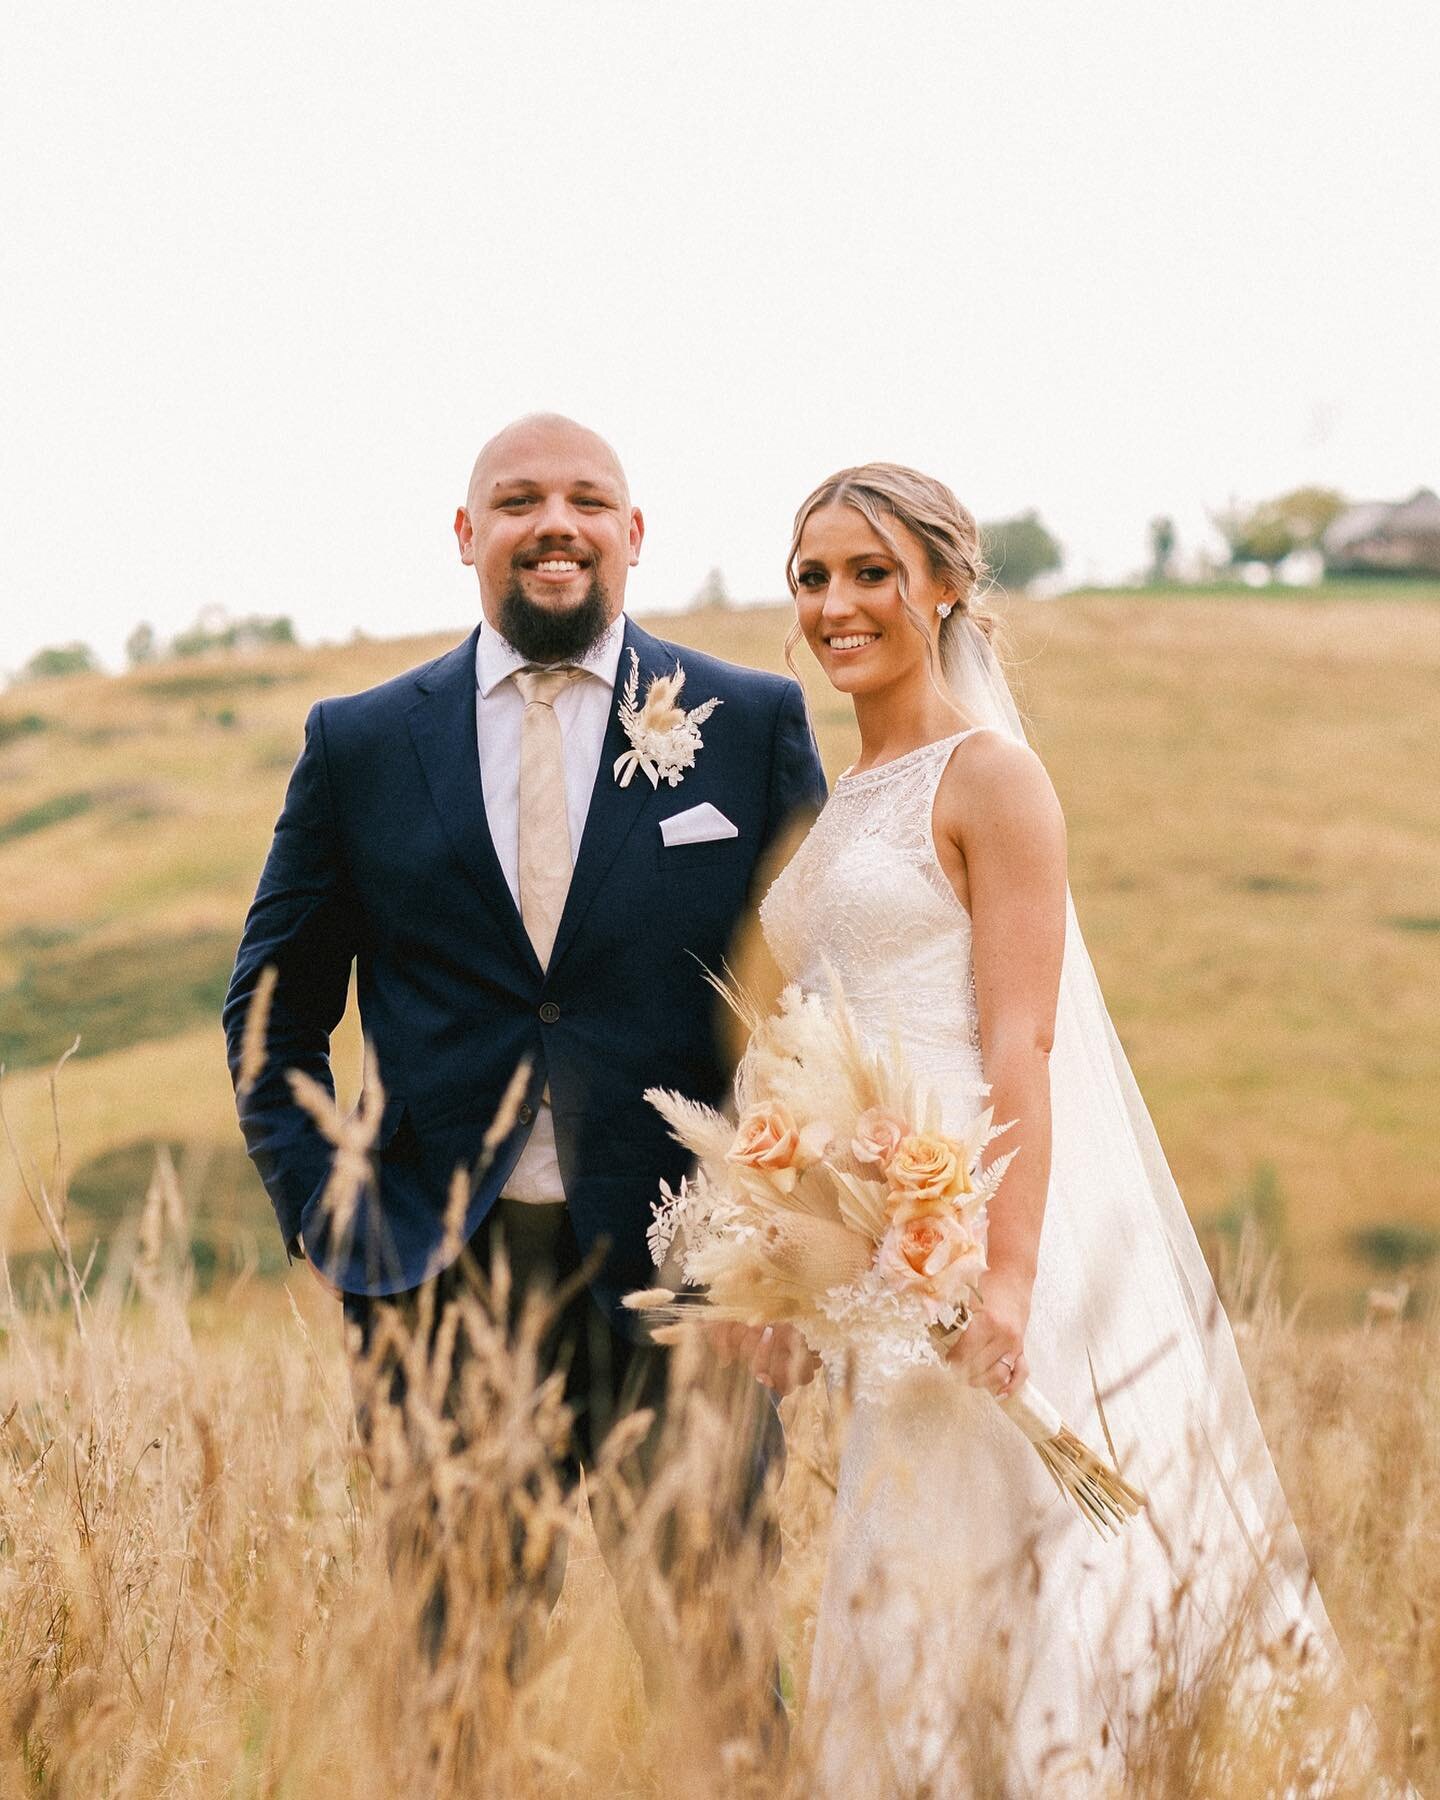 There&rsquo;s love in the hills!
Nico and Josh ⚡️at @riverstoneestate

Thanks for having me along!💕

#bride #groom #brides #grooms #gettingmarried #wedding #weddingblog #weddinginspiration #weddinginspo #bridal #bridalfashion #justmarried #married #